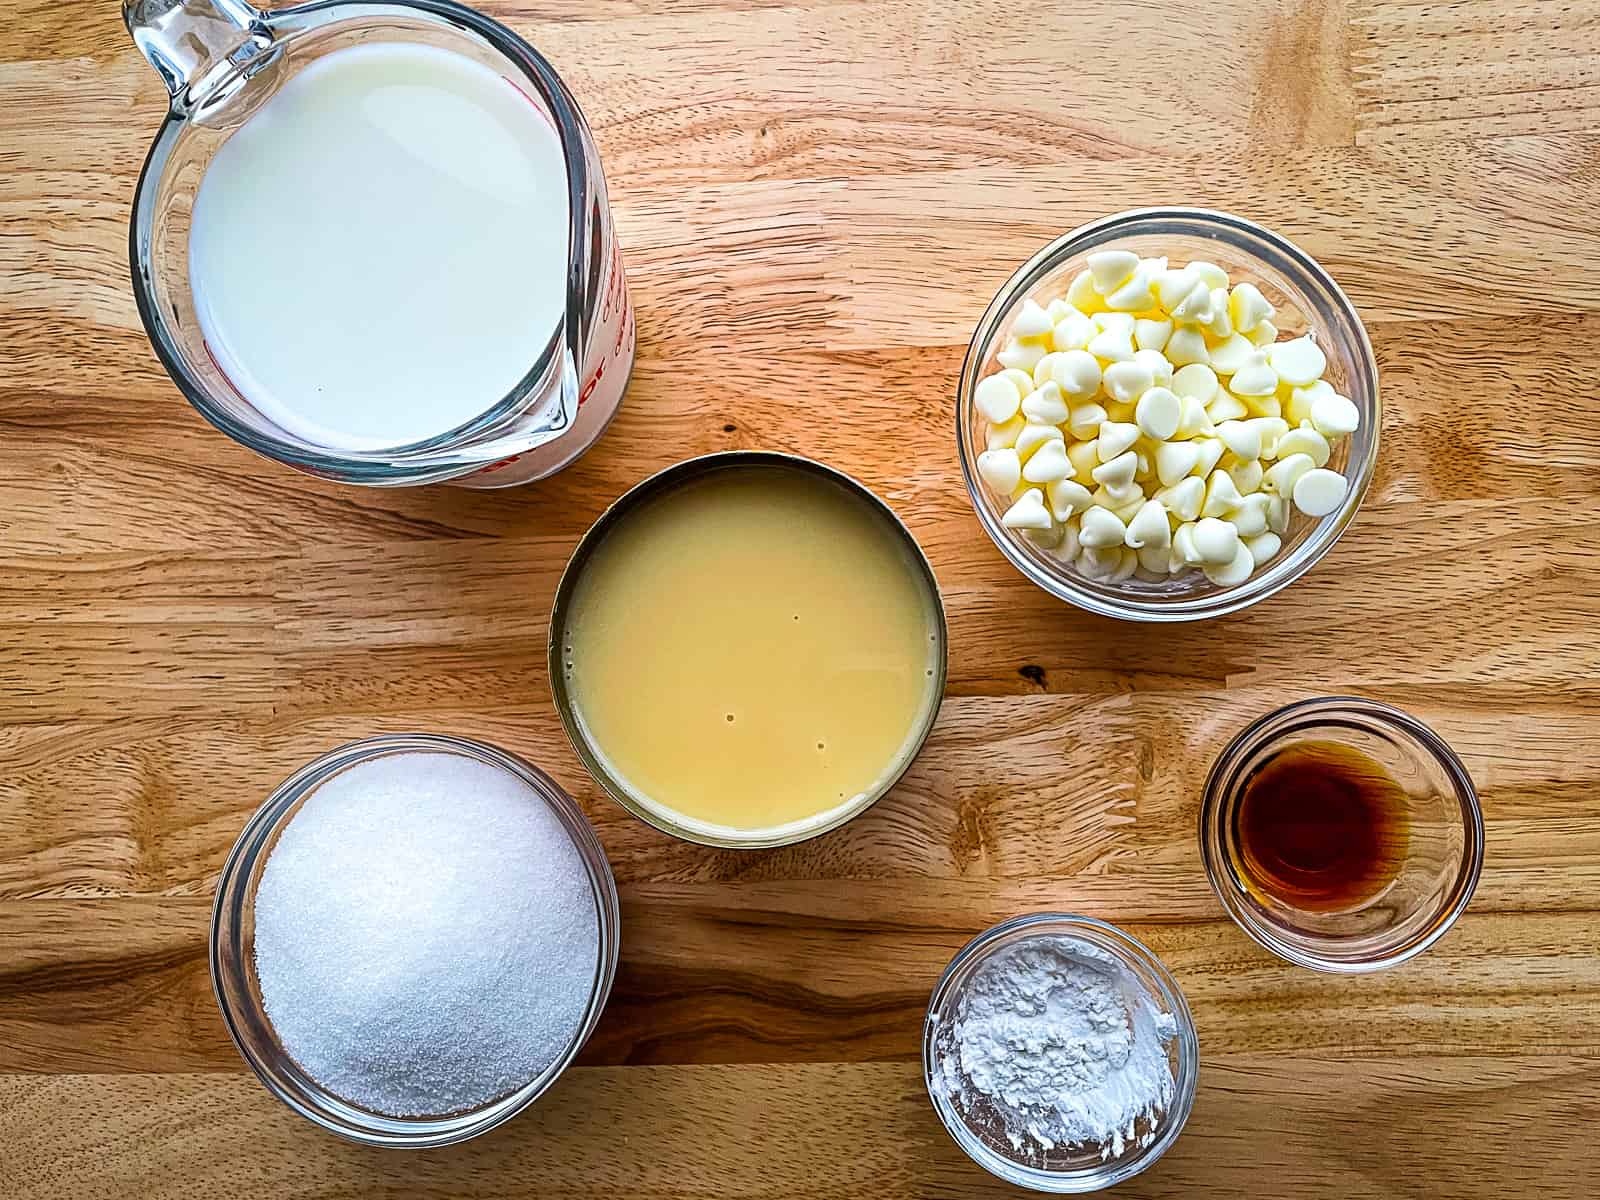 Ingredients for white chocolate sauce.